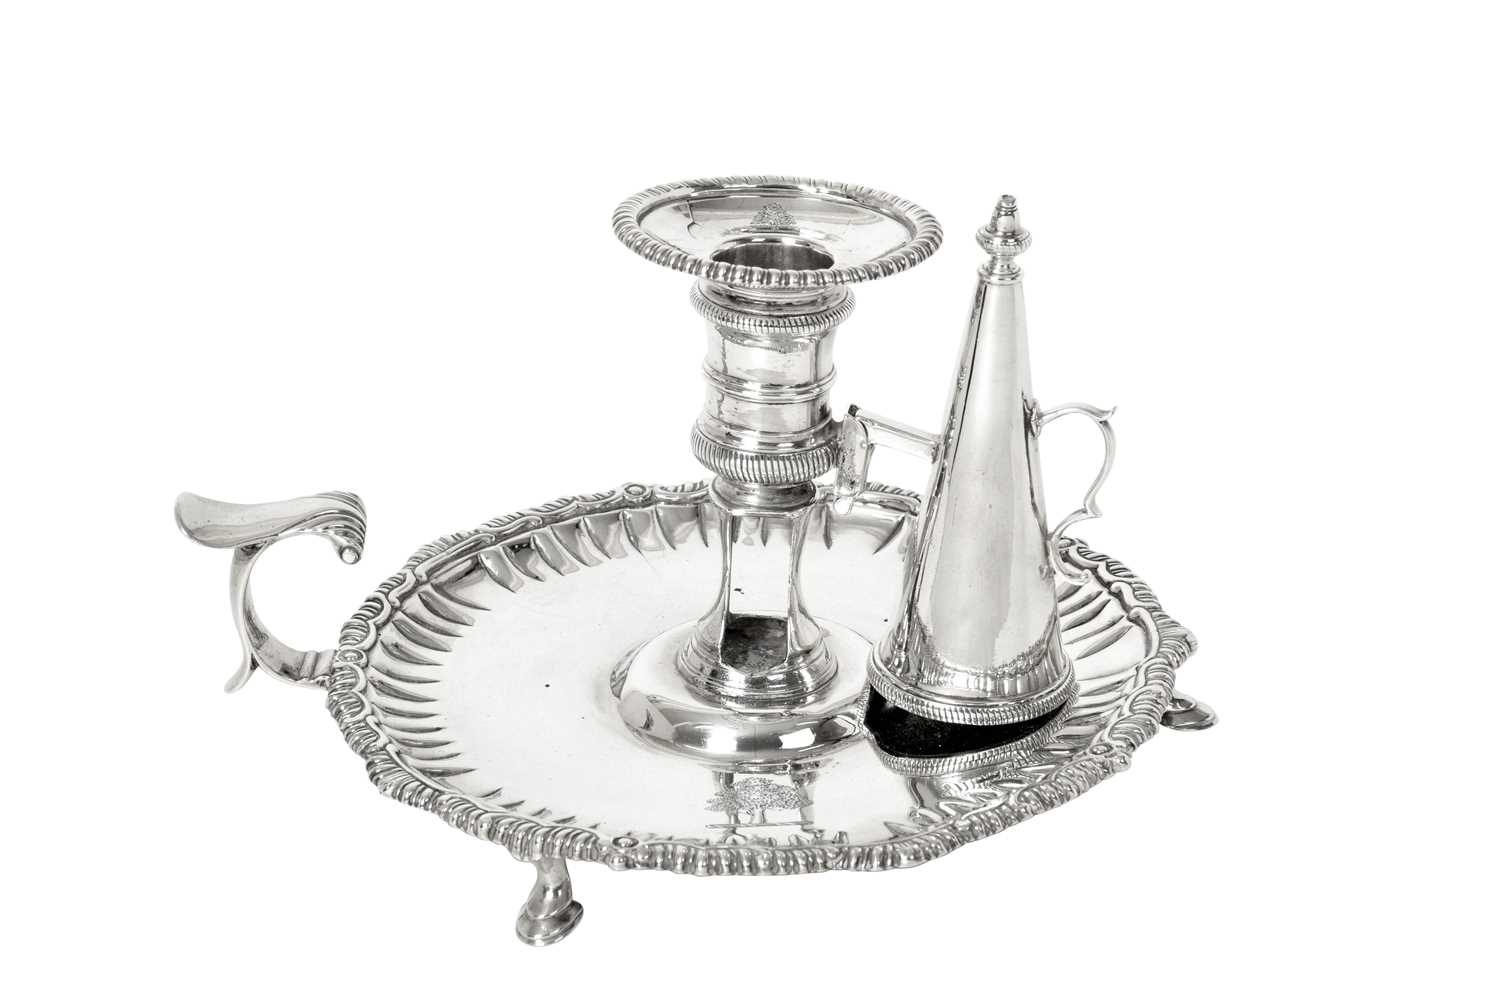 A George III Silver Chamber-Candlestick, by William Cafe, London, 1764